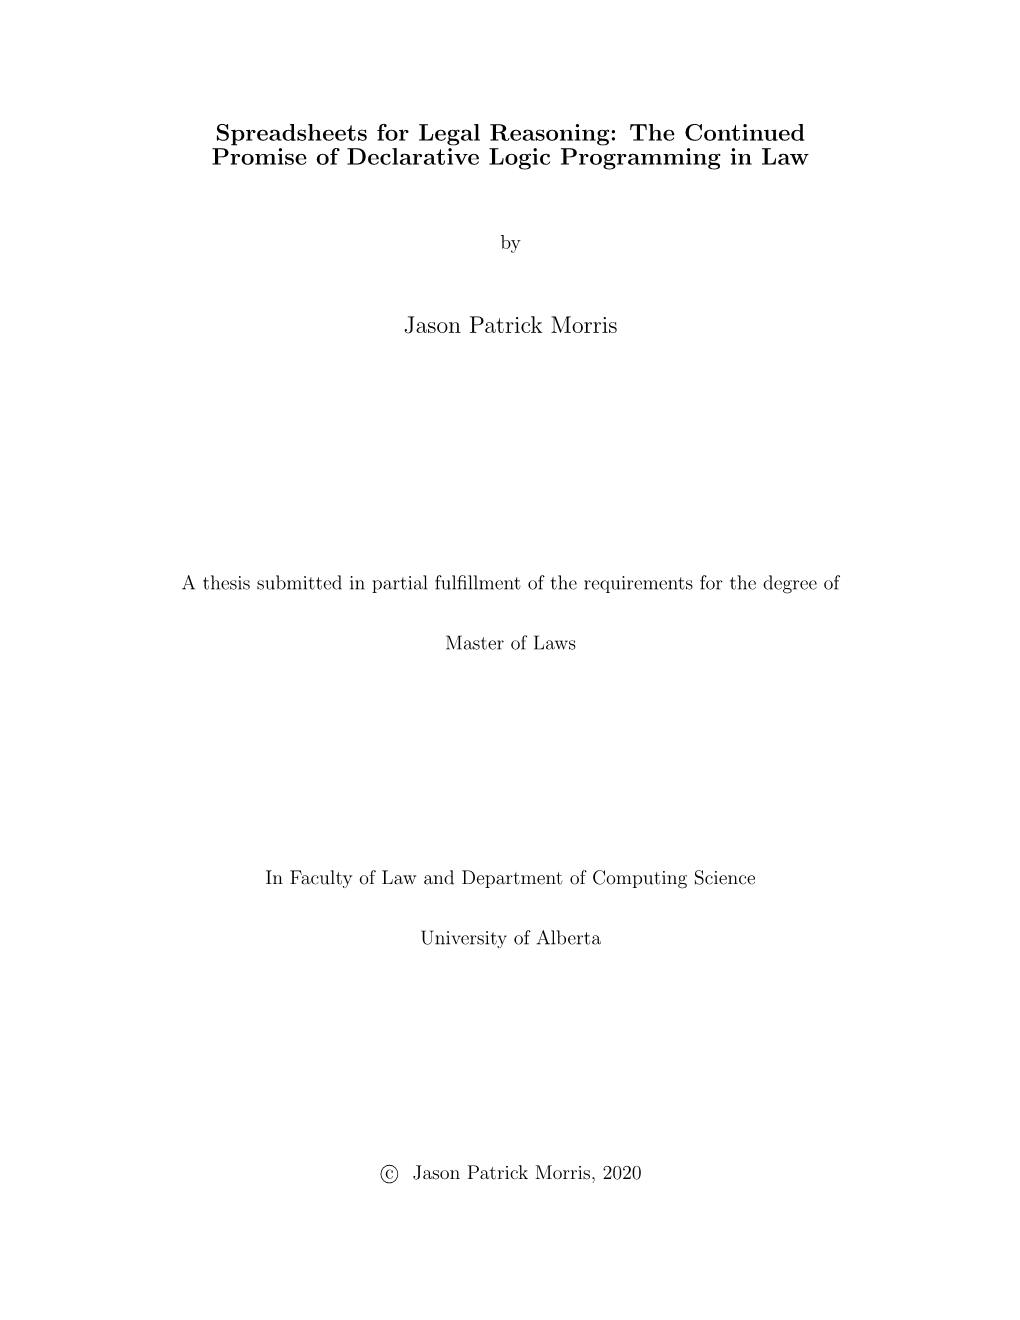 Spreadsheets for Legal Reasoning: the Continued Promise of Declarative Logic Programming in Law